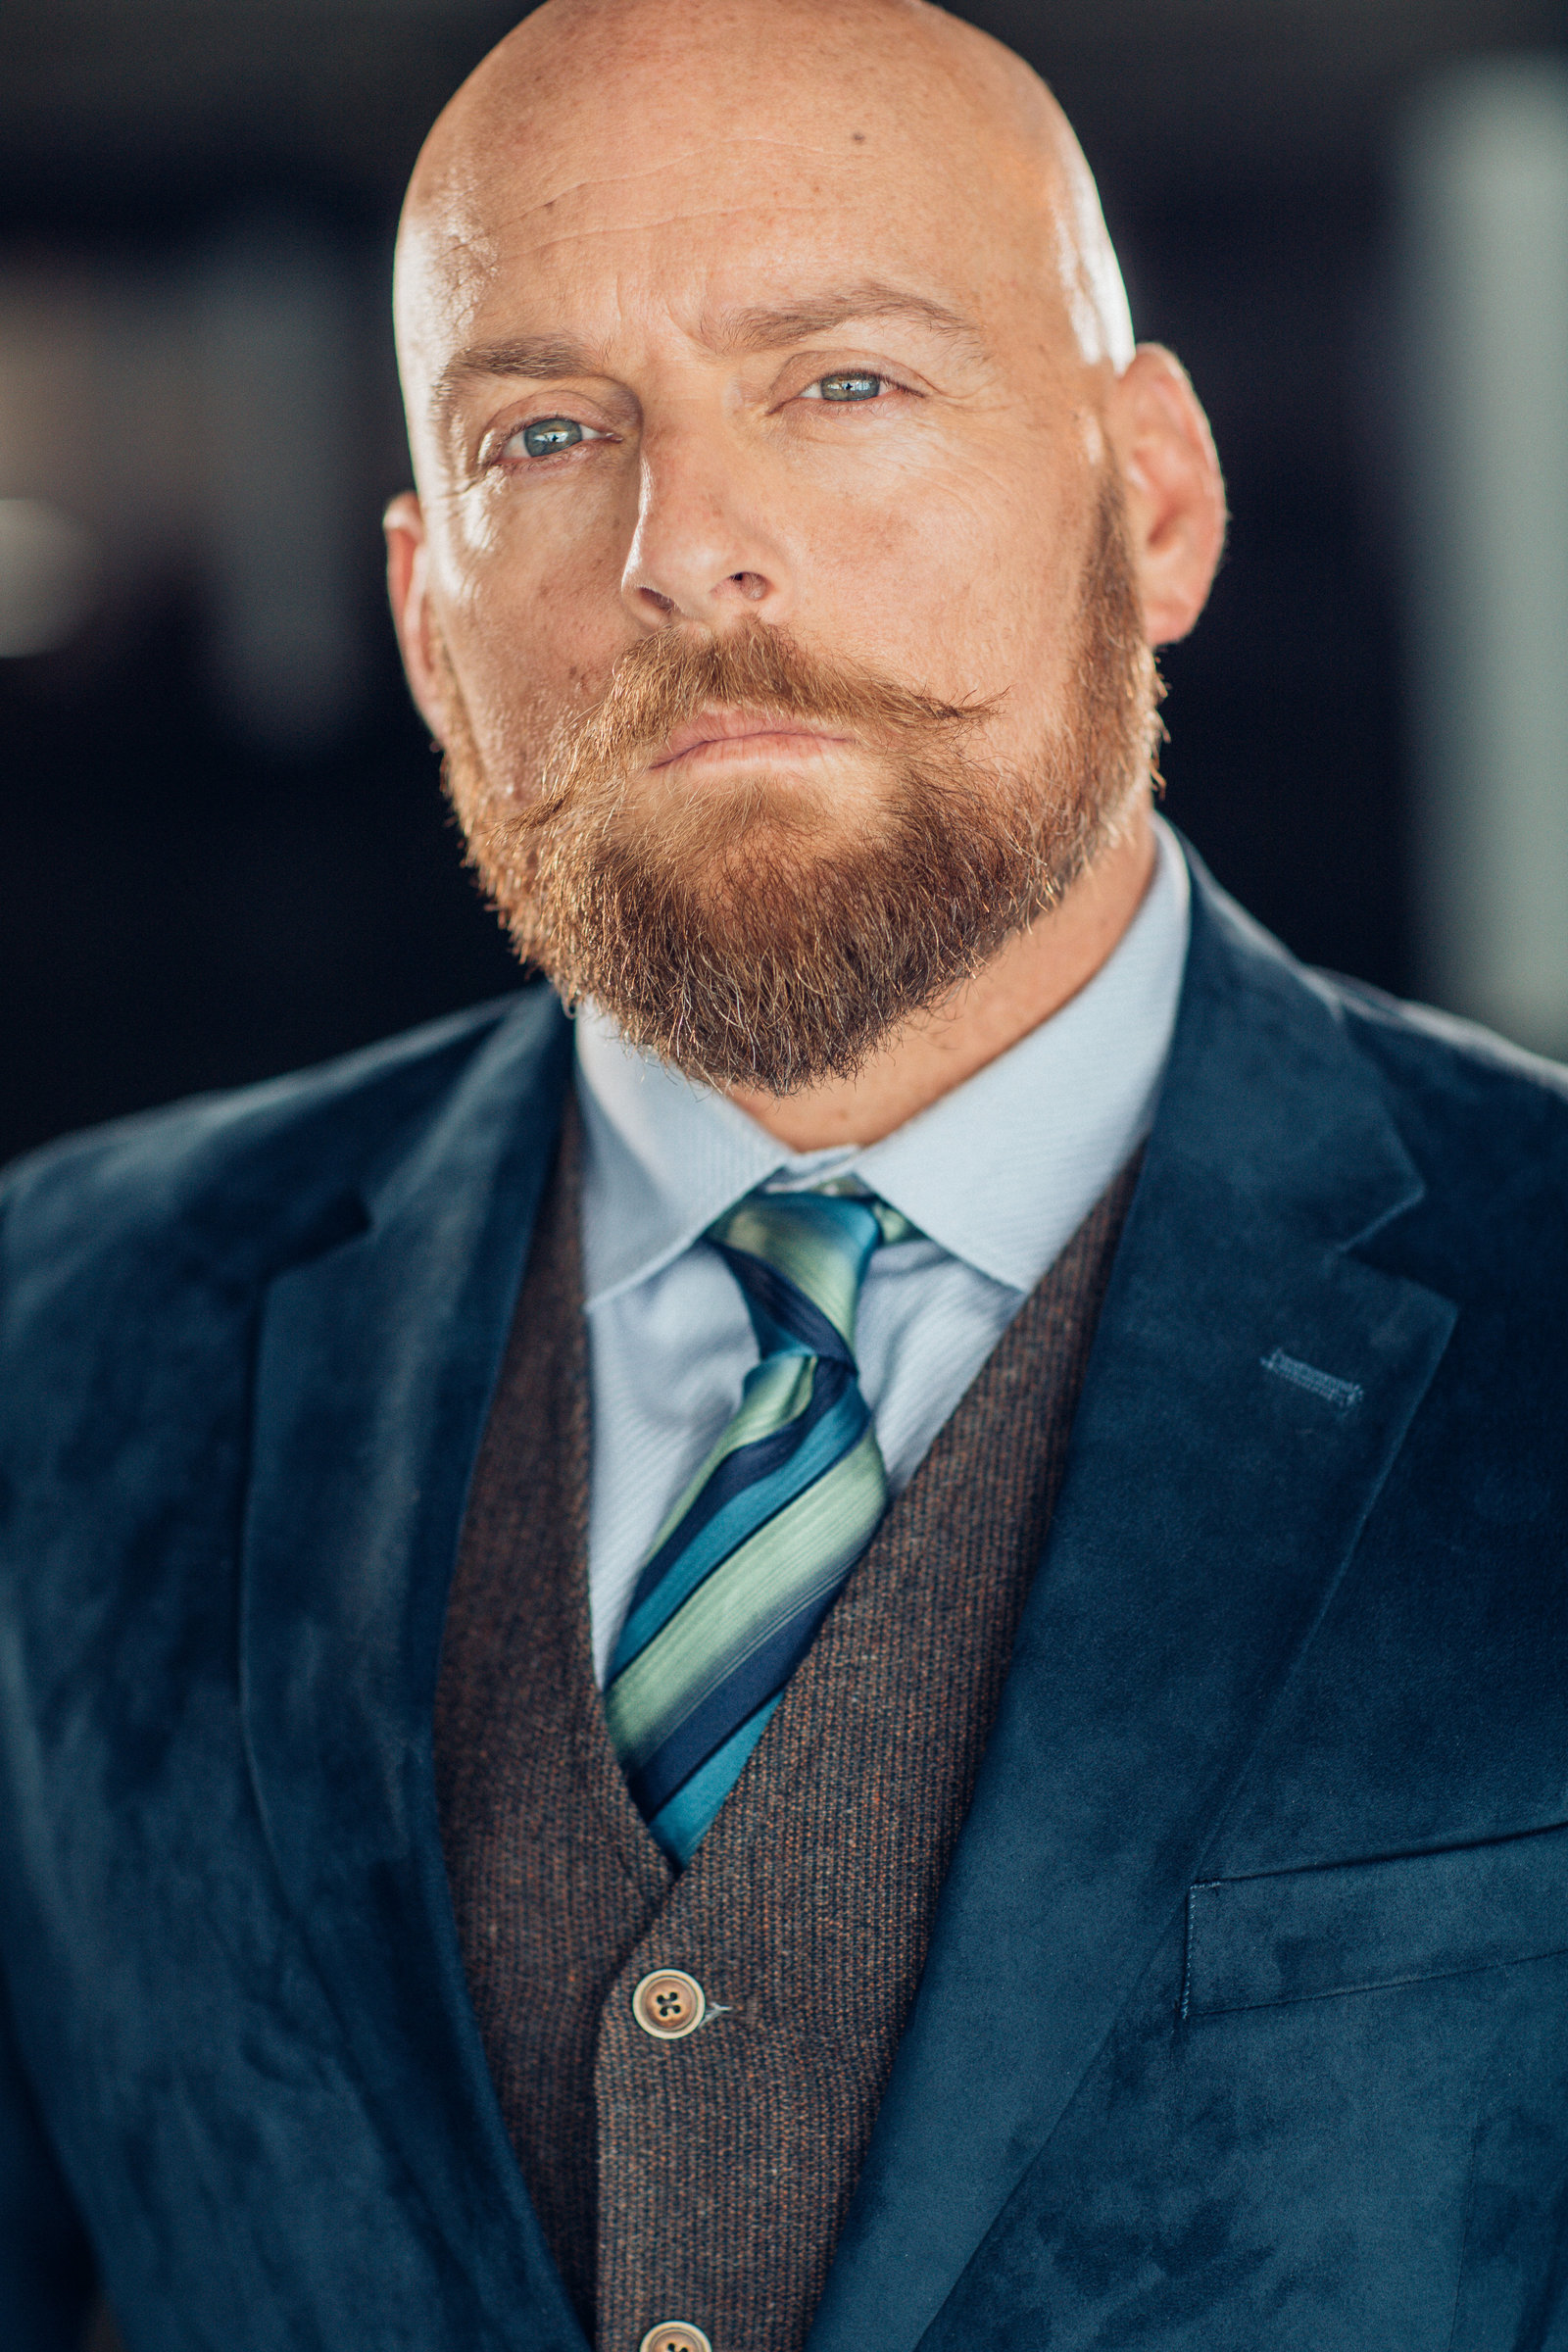 Headshot Photo Of Man In Blue Suit